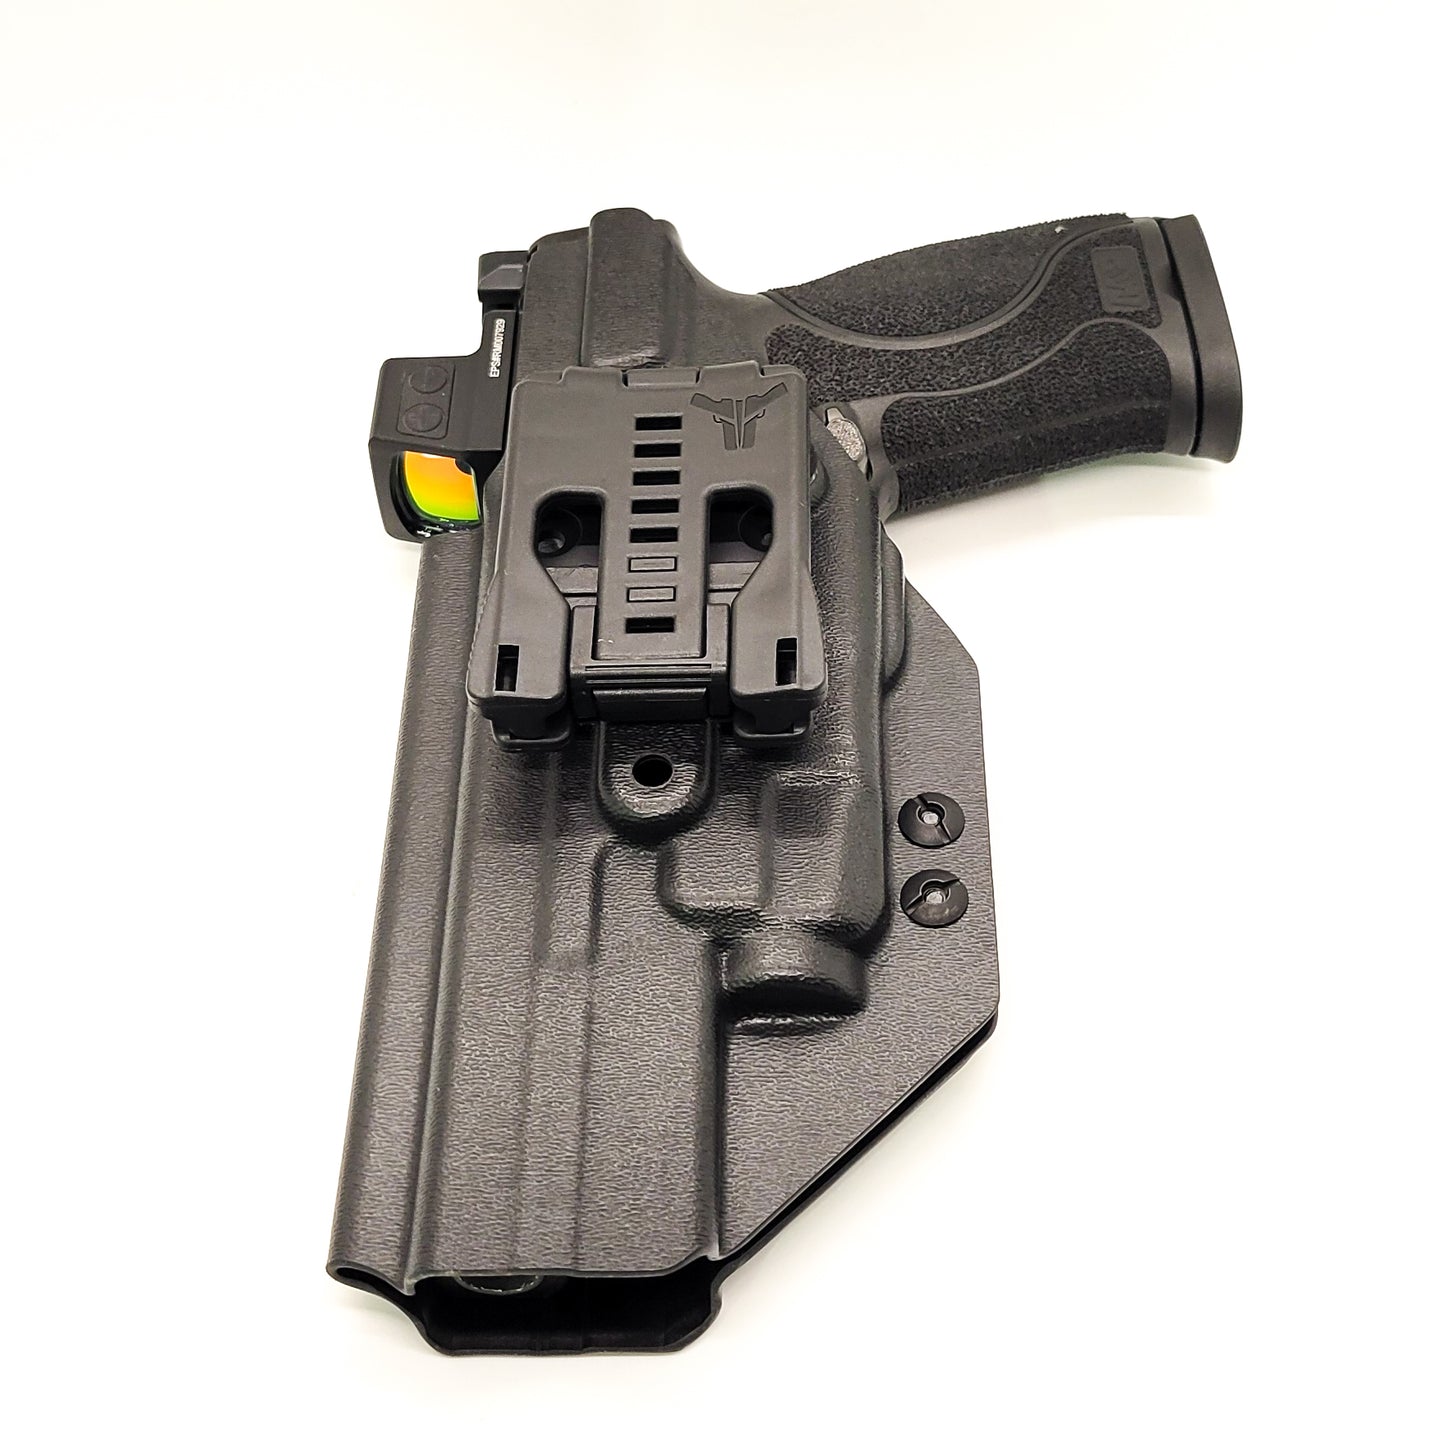 For the best Outside Waistband OWB Kydex Holster designed to fit the Smith & Wesson M&P 10mm 5.6" Performance Center M2.0 pistol with thumb safety & TLR-7A or TLR-7X, shop Four Brothers Holsters.  Full sweat guard, adjustable retention. Made in the USA Open muzzle for threaded barrels, cleared for red dot sights.  